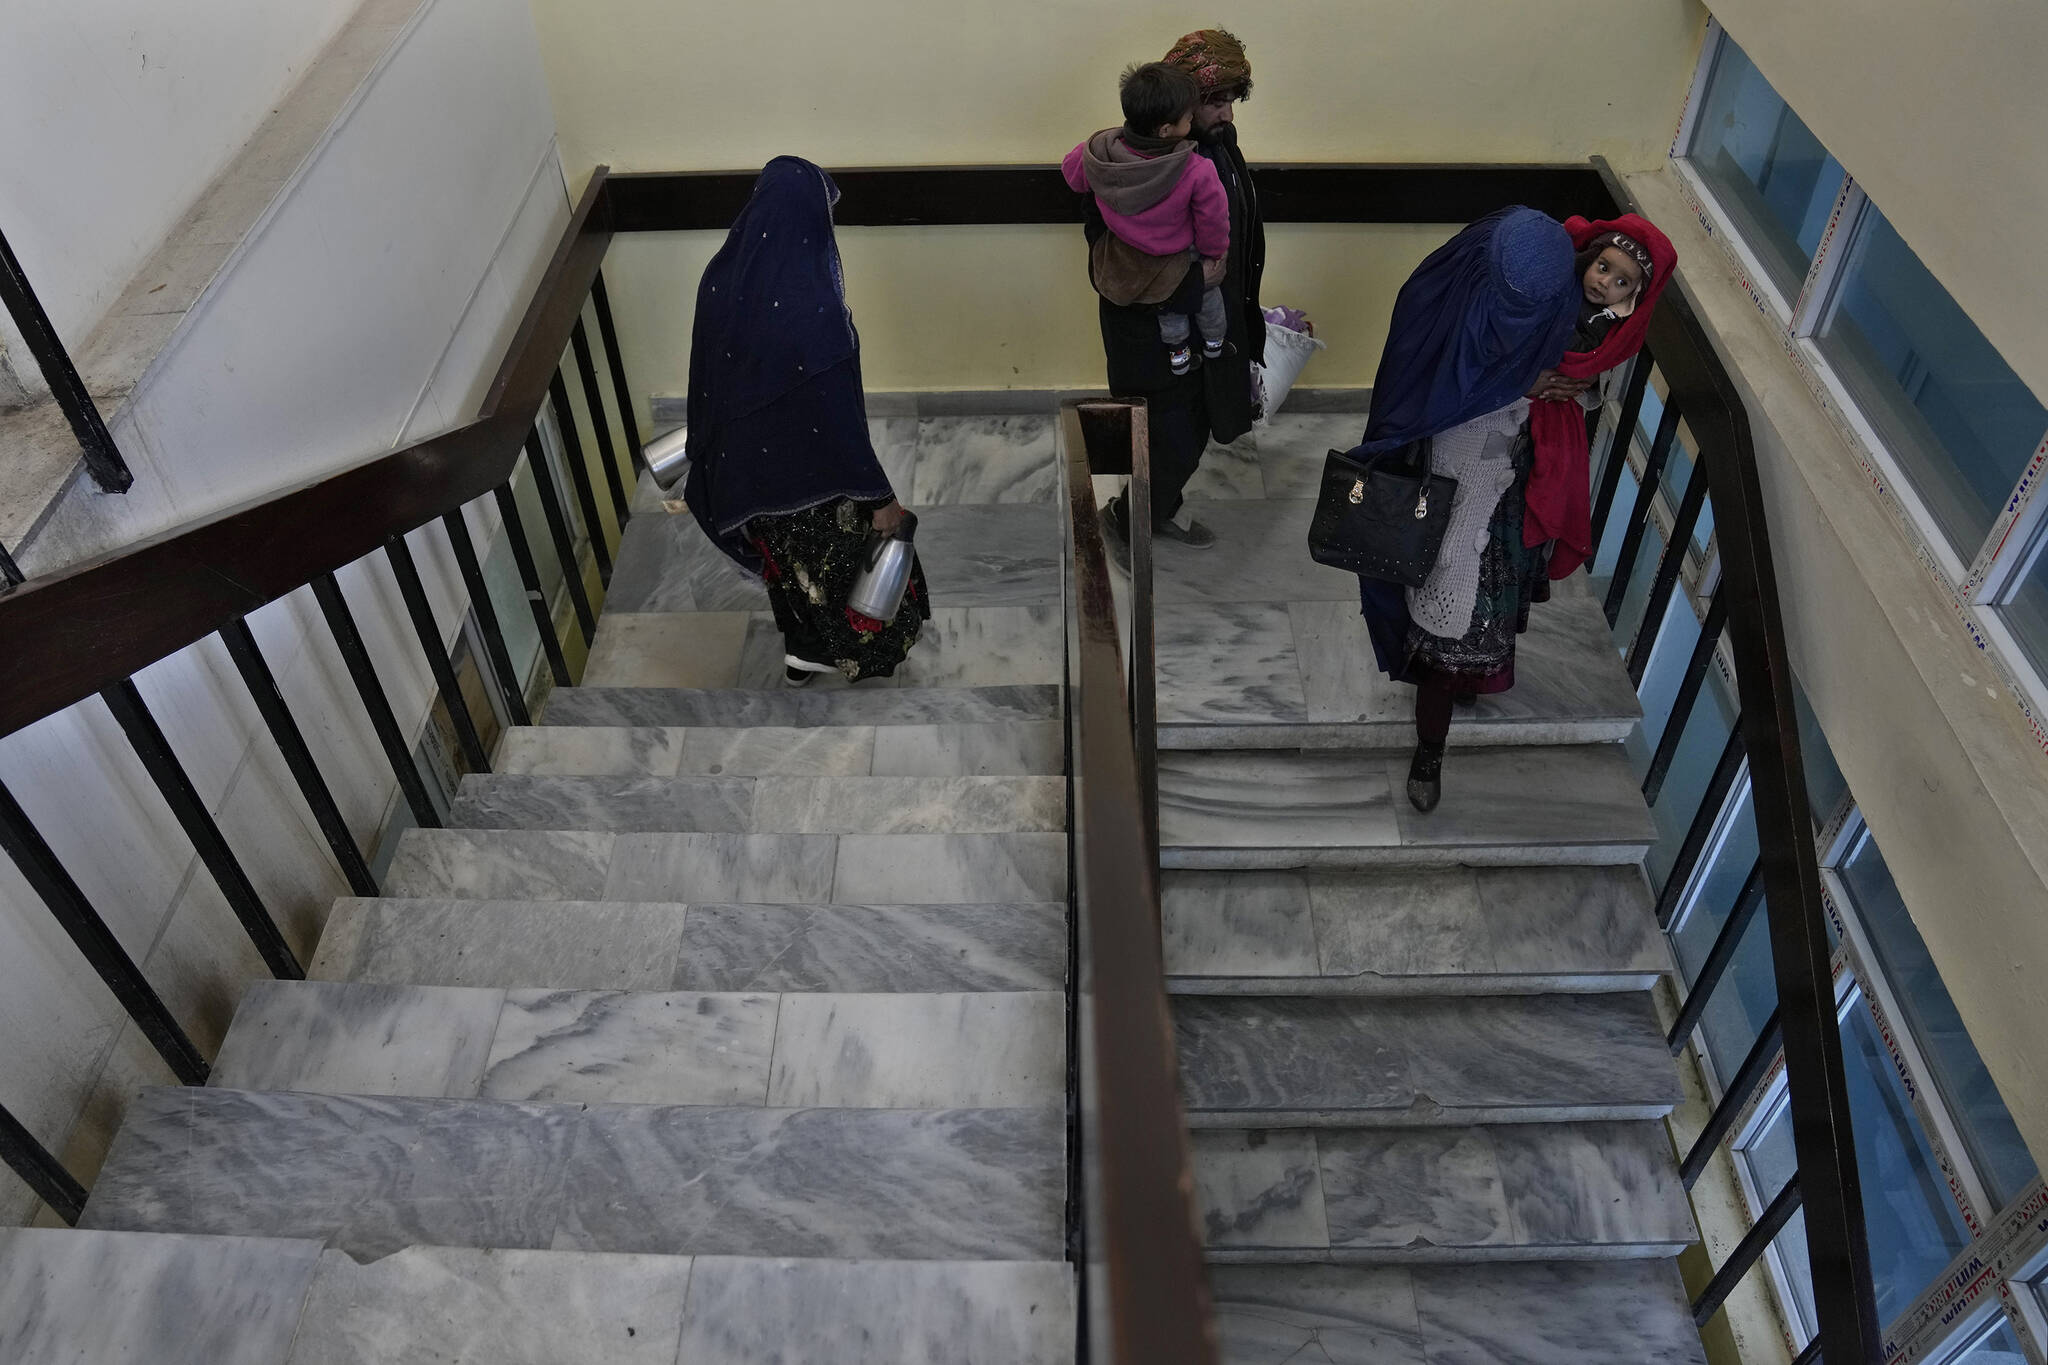 Afghan parents carry their children, as they leave the malnutrition ward floor, at the Indira Gandhi Children’s Hospital, in Kabul, Afghanistan, Thursday, Feb. 24, 2022. (AP Photo/Hussein Malla)